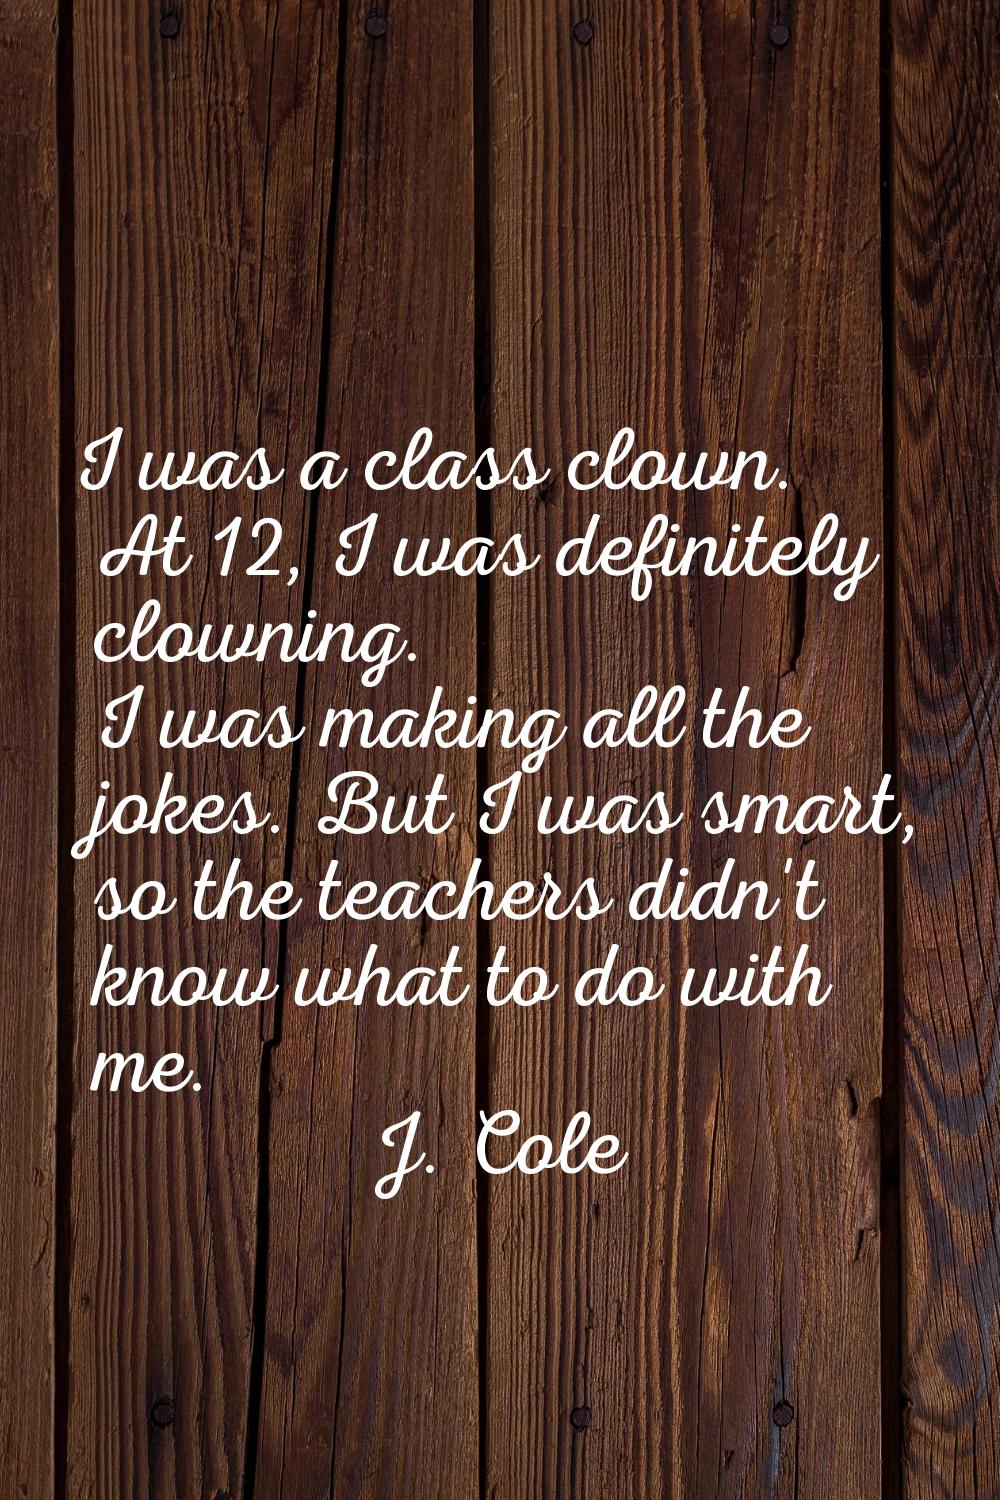 I was a class clown. At 12, I was definitely clowning. I was making all the jokes. But I was smart,